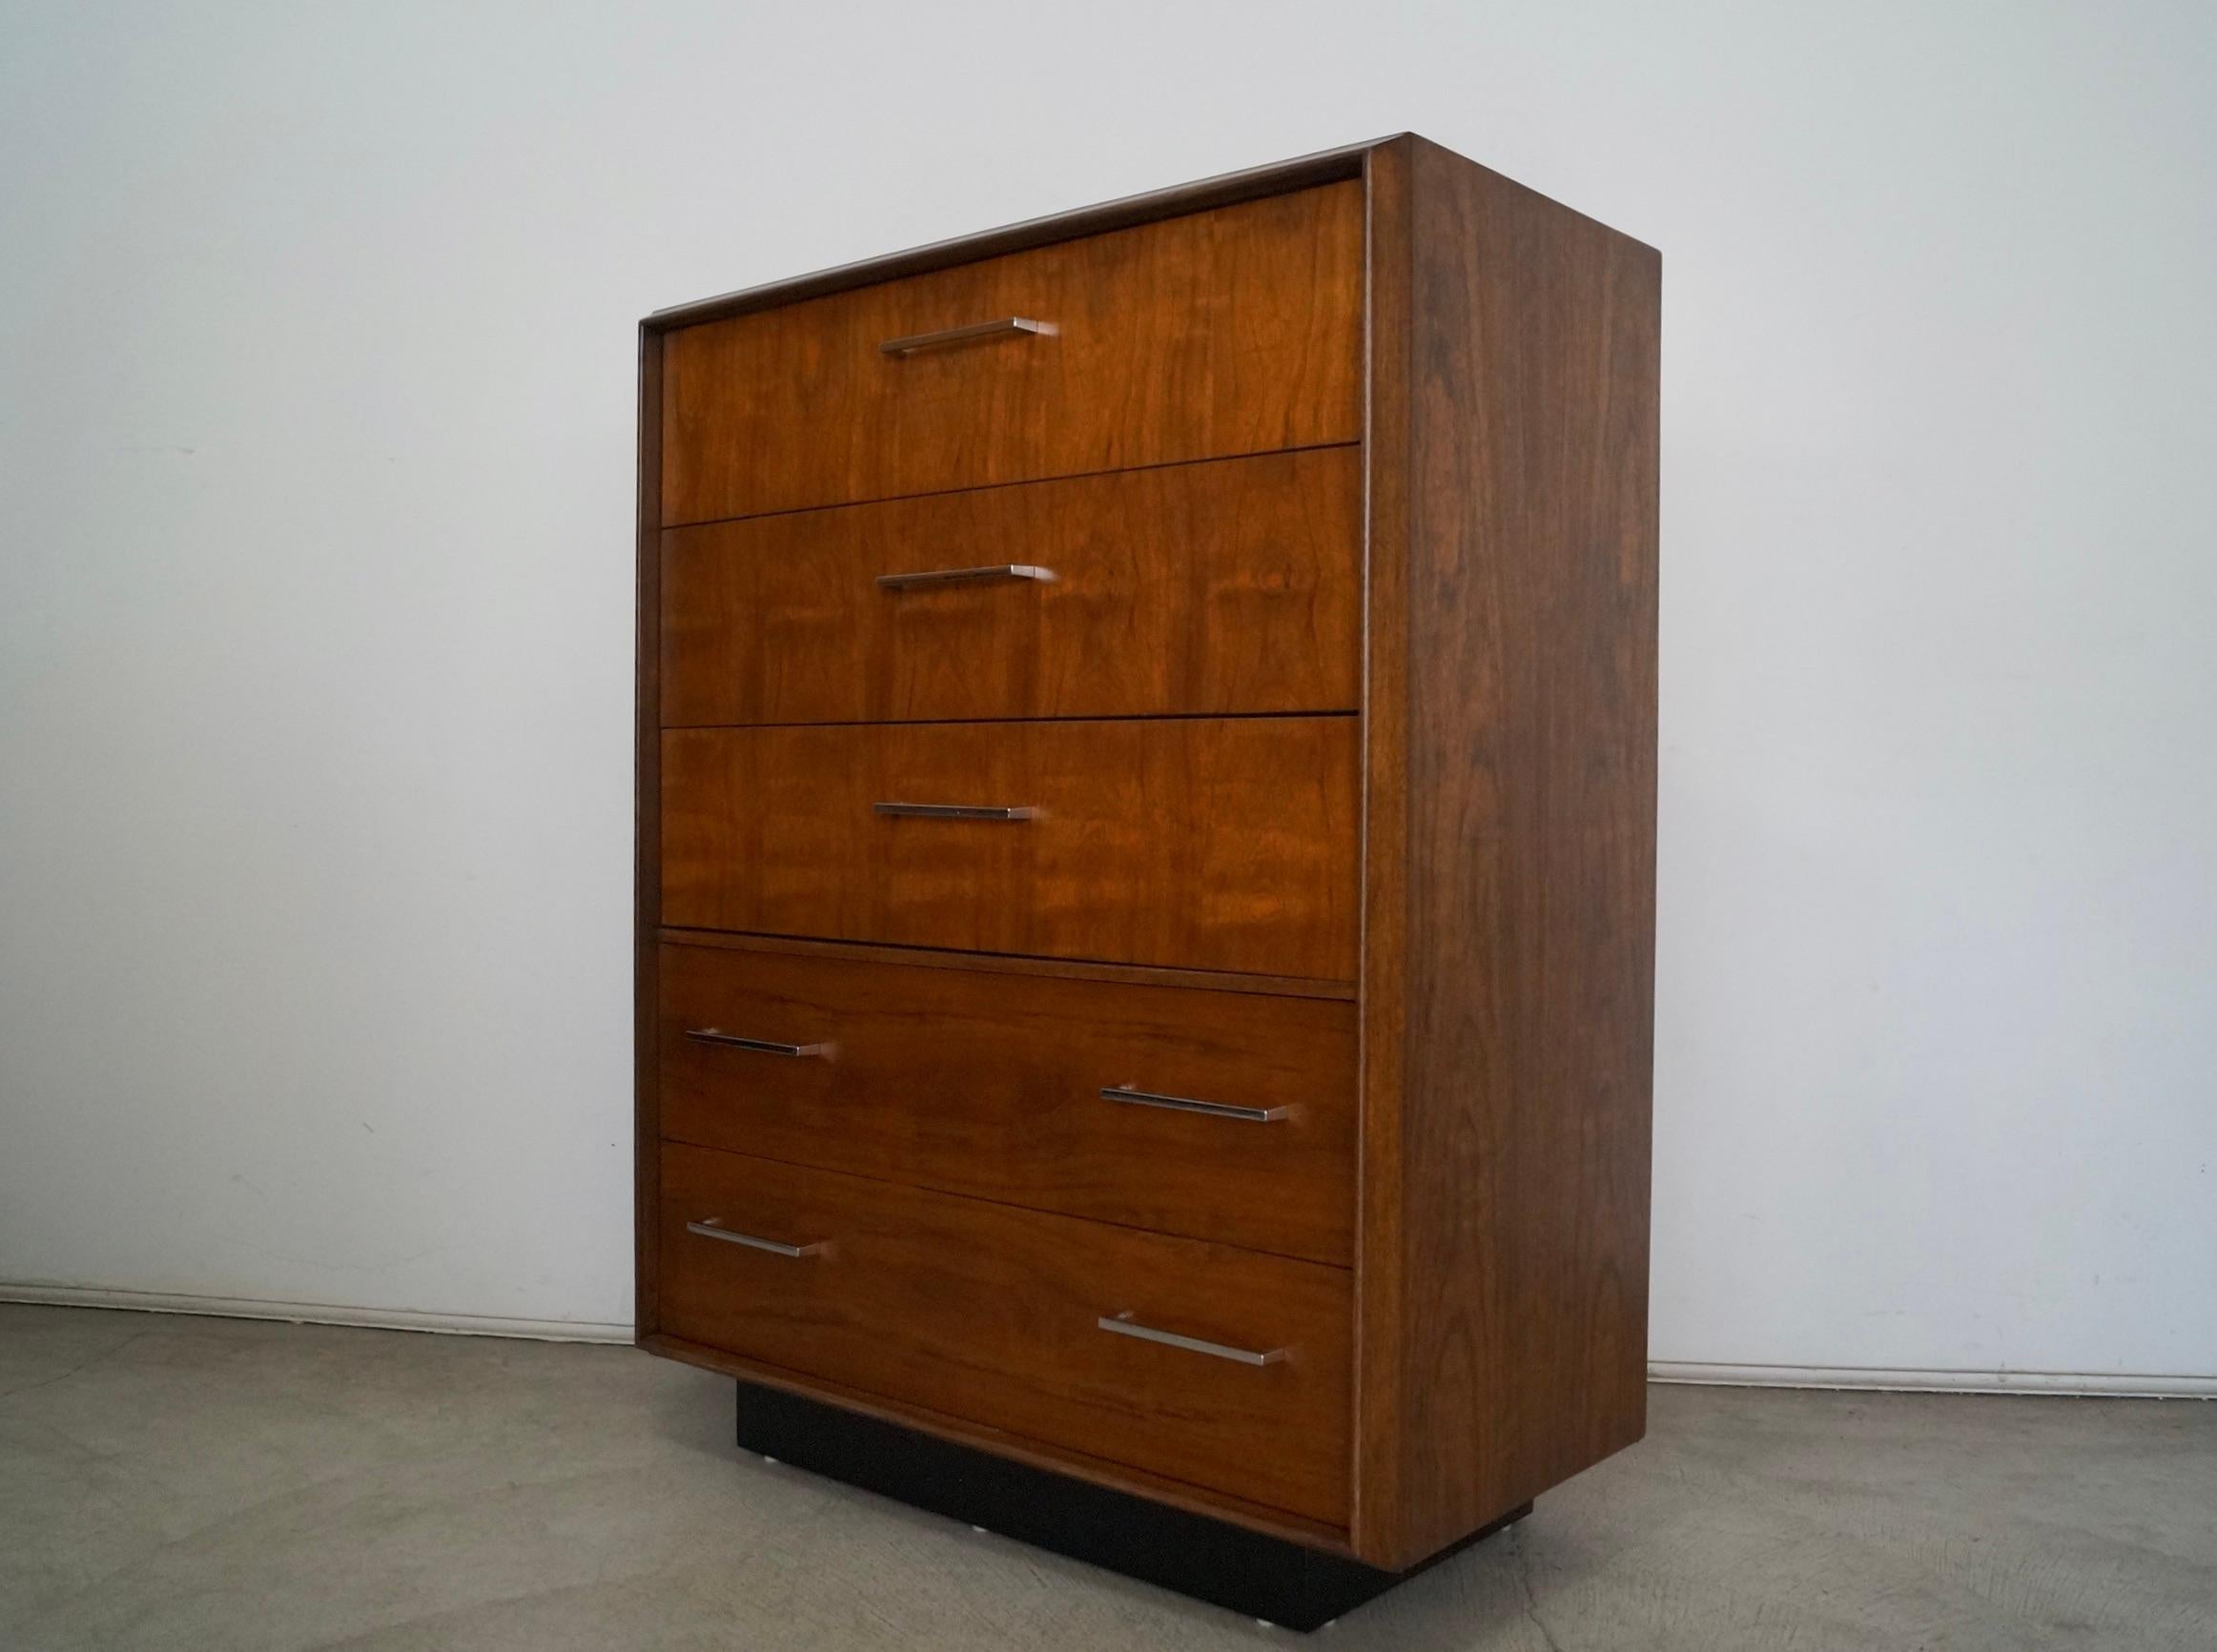 Vintage 1960s Mid-Century Modern dresser for sale. Manufactured by Lane, and has been professionally refinished. Has the original chrome handles, and has a plinth base in a black finish. It has five drawers that are dovetailed on both ends. It has